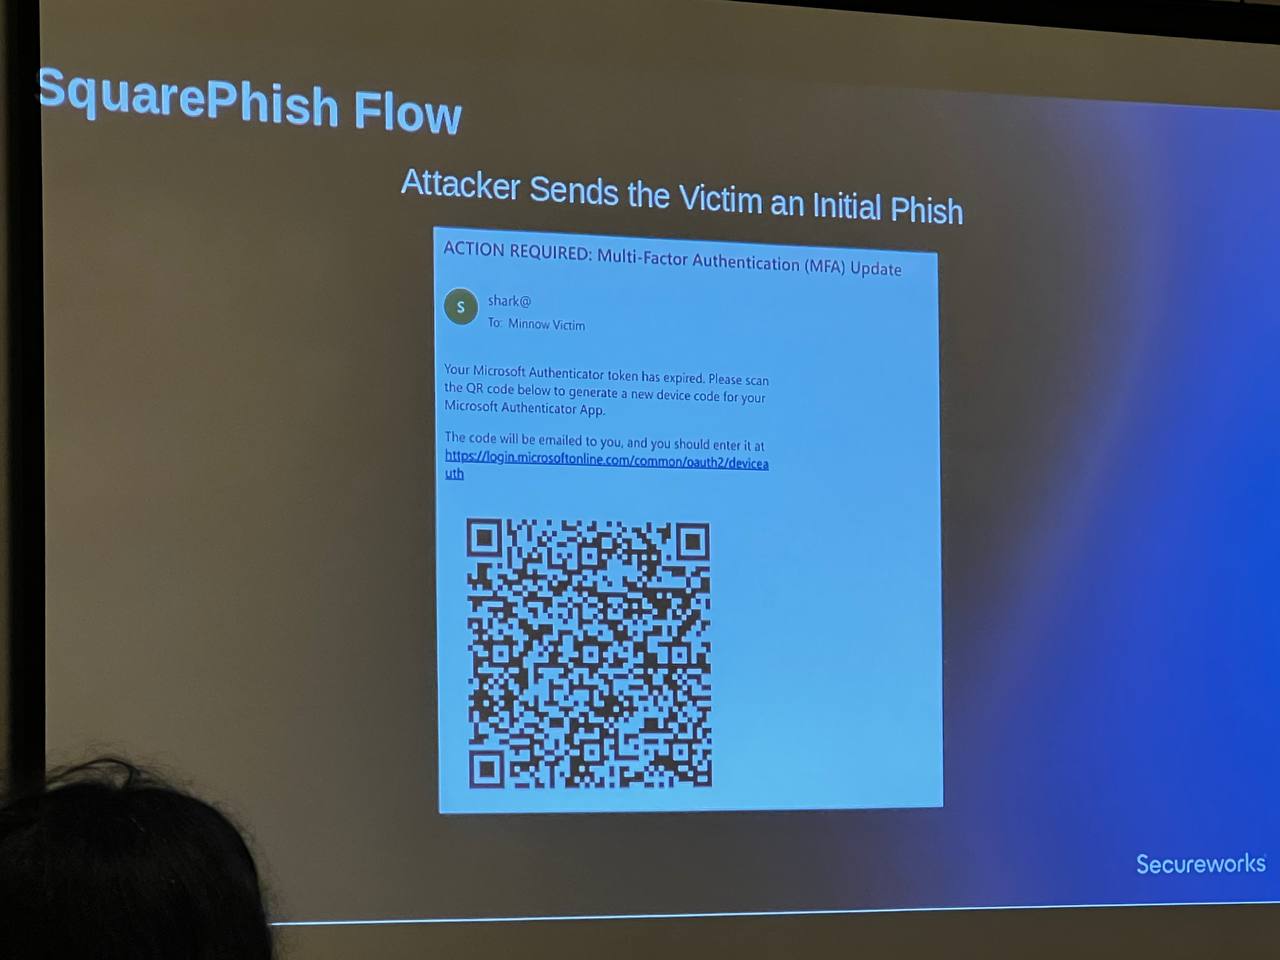 Attacker sends the victim an initial phish with a QR code embedded